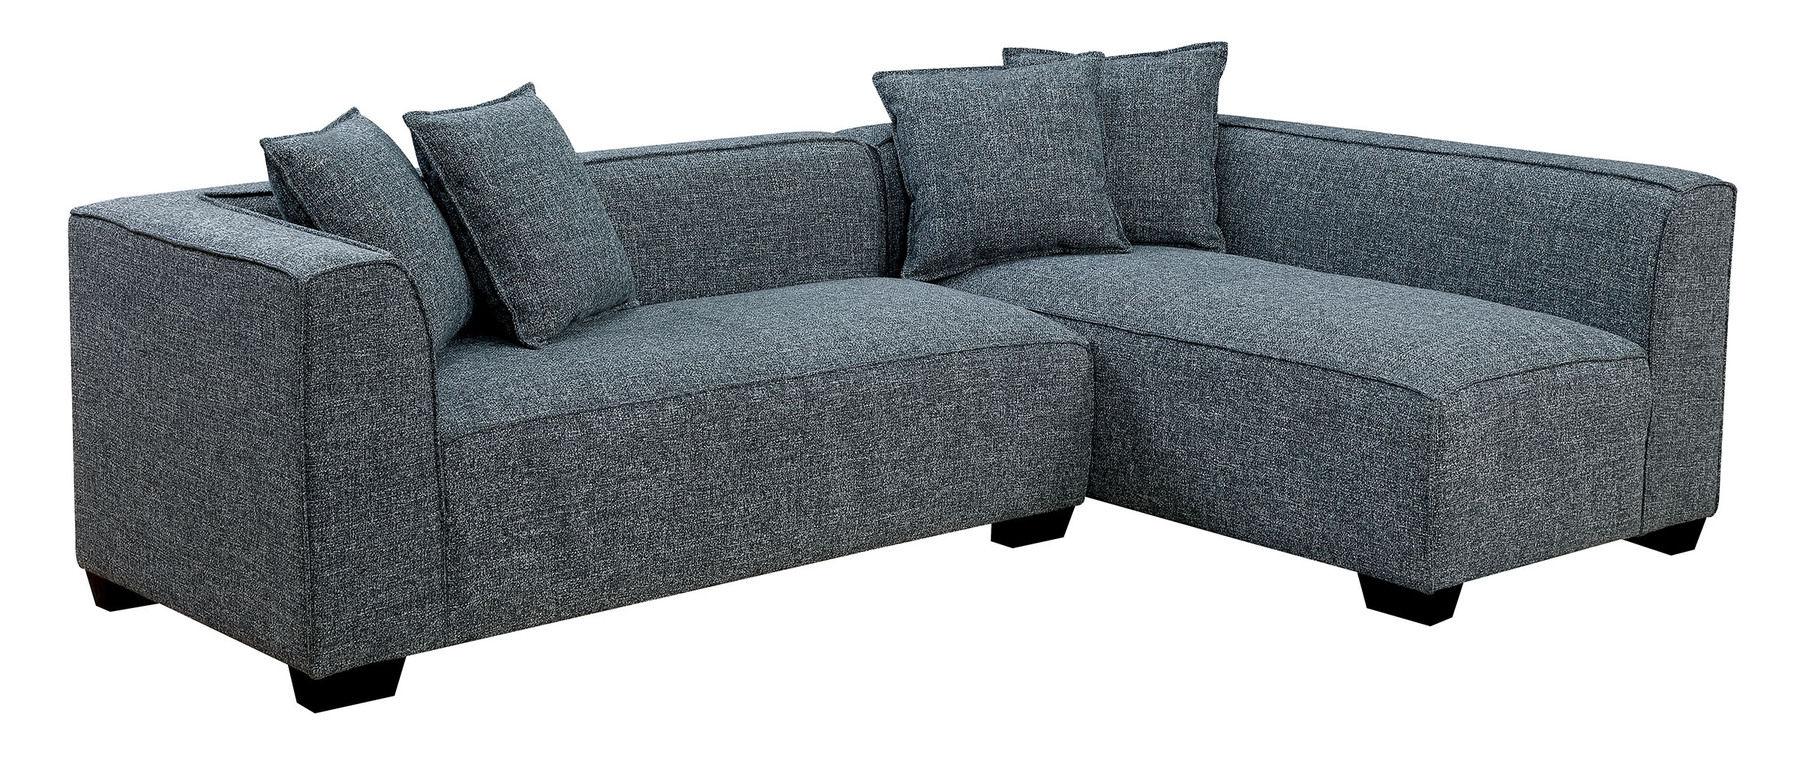 Contemporary Sectional Sofa and Ottoman CM6120-2PC Jaylene CM6120-2PC in Gray 